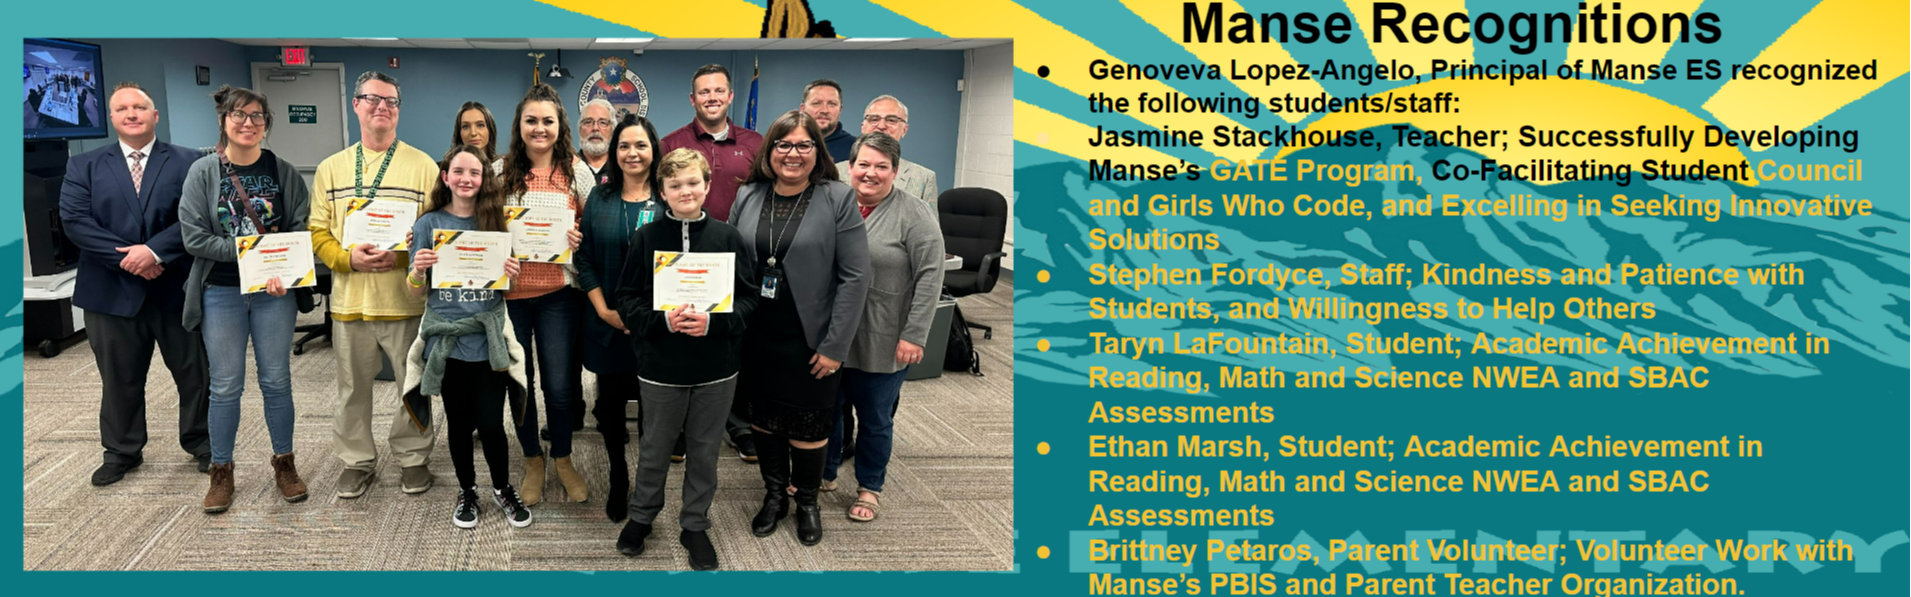 Manse recognizes students, staff, and parents at the board meeting